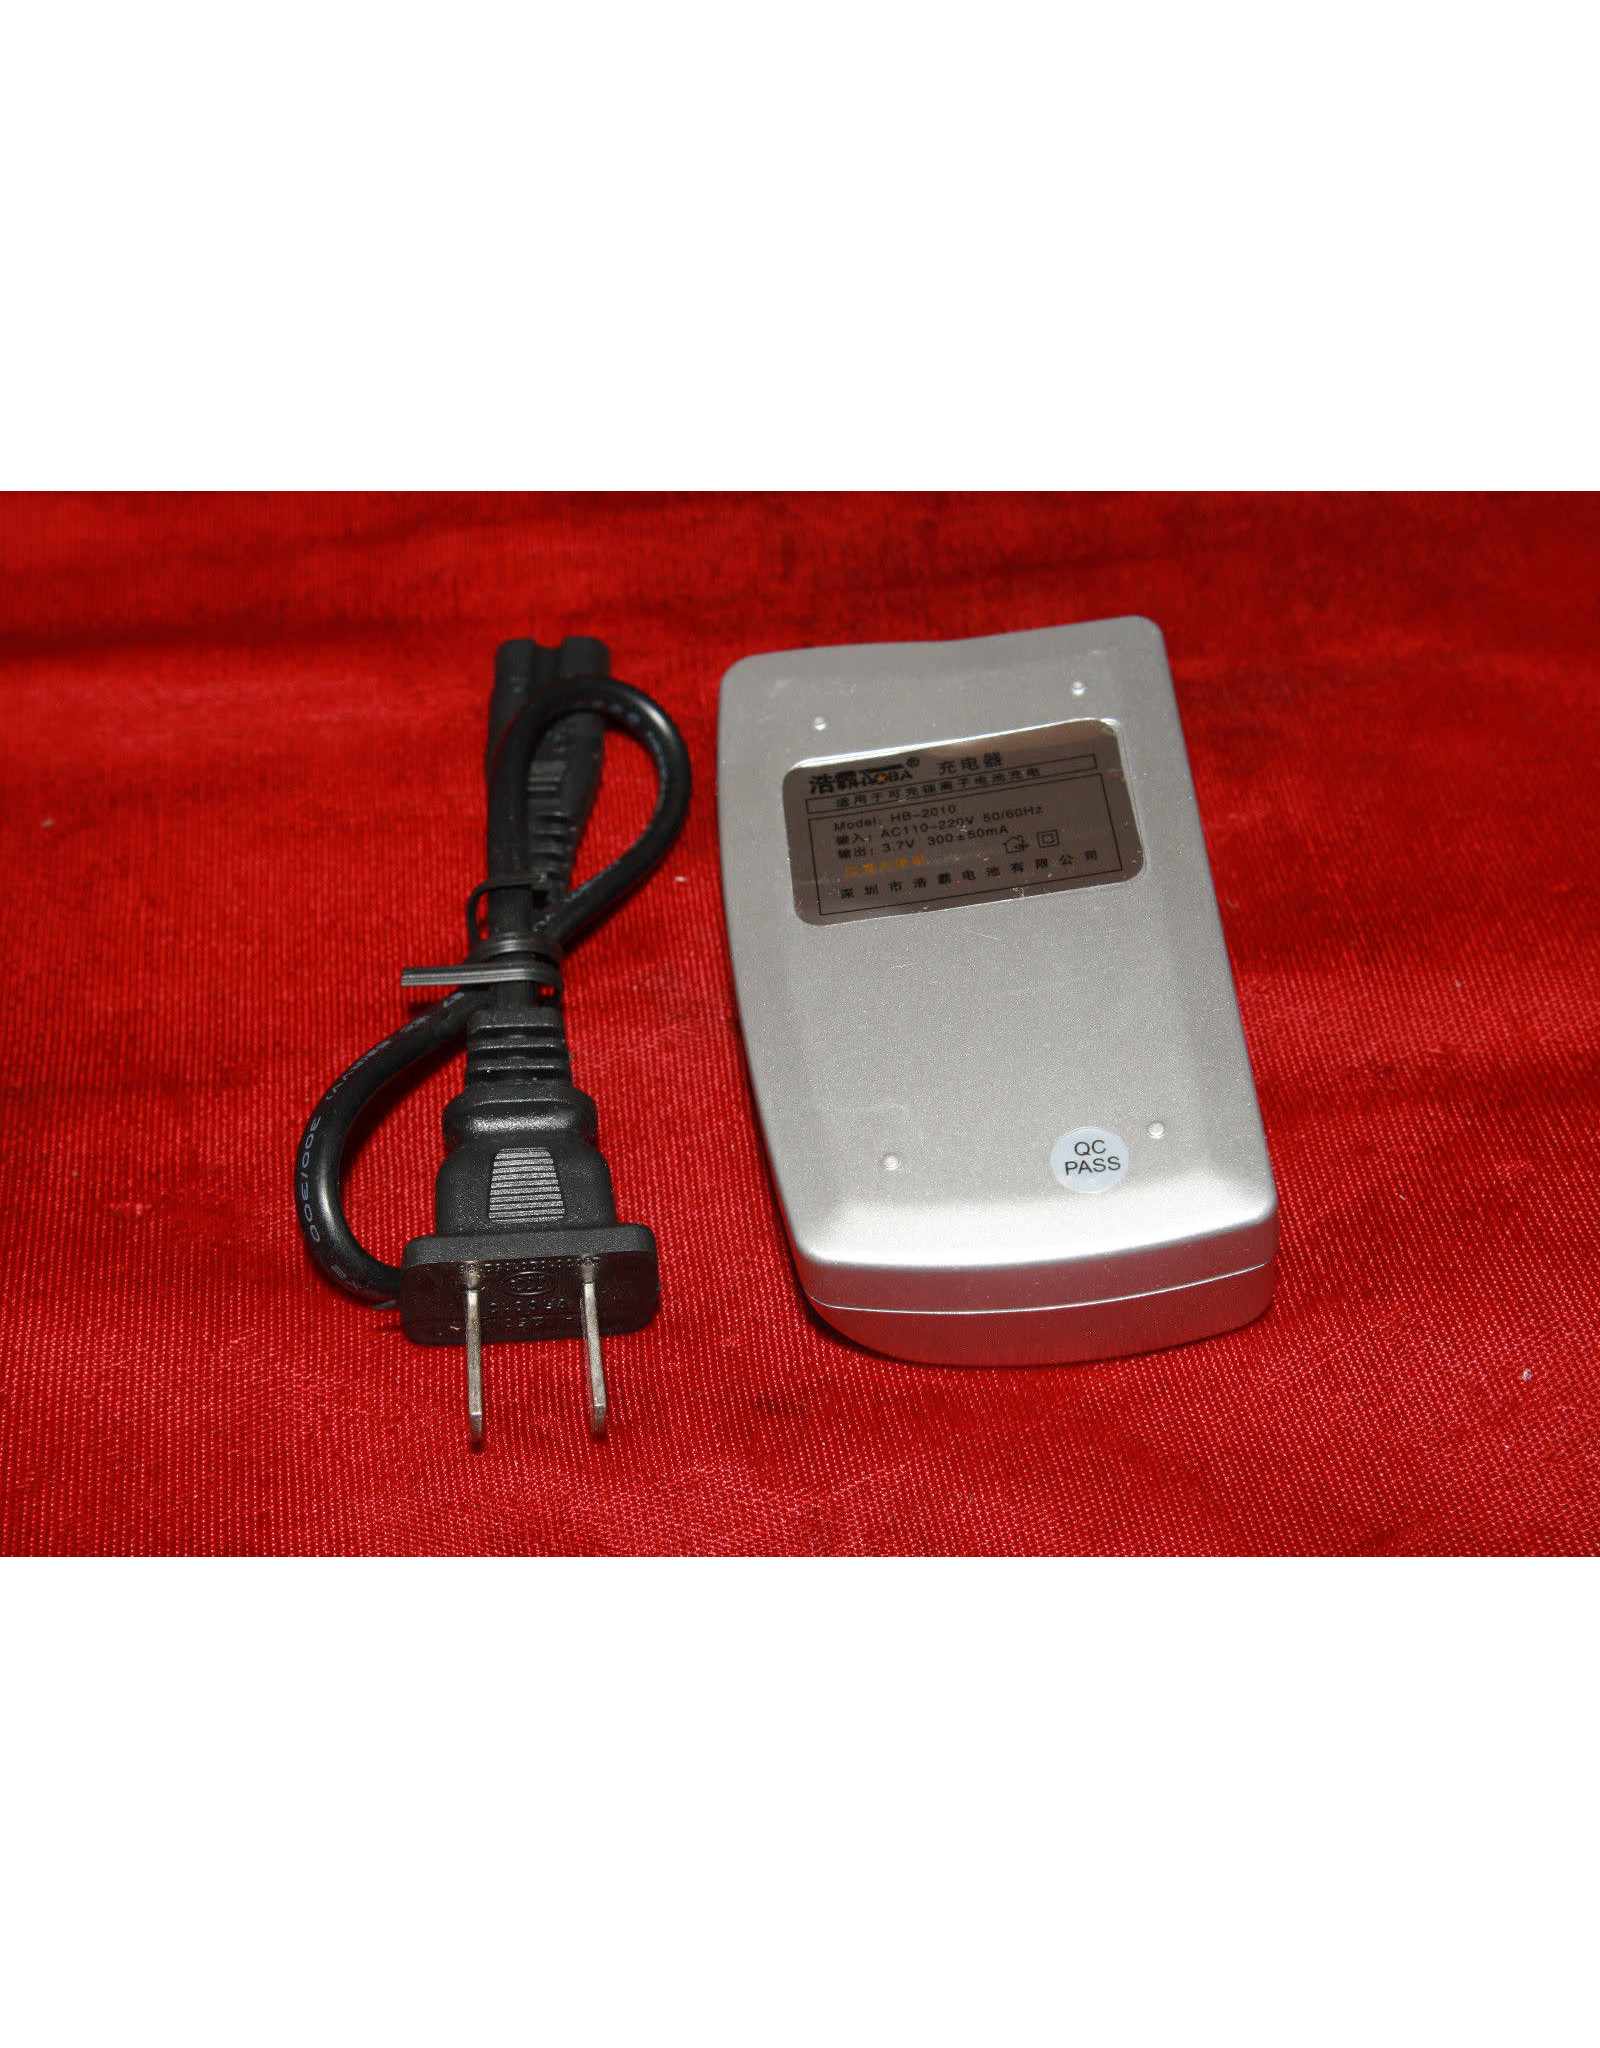 Lithium CR123 Charger (as supplied with Green laser)